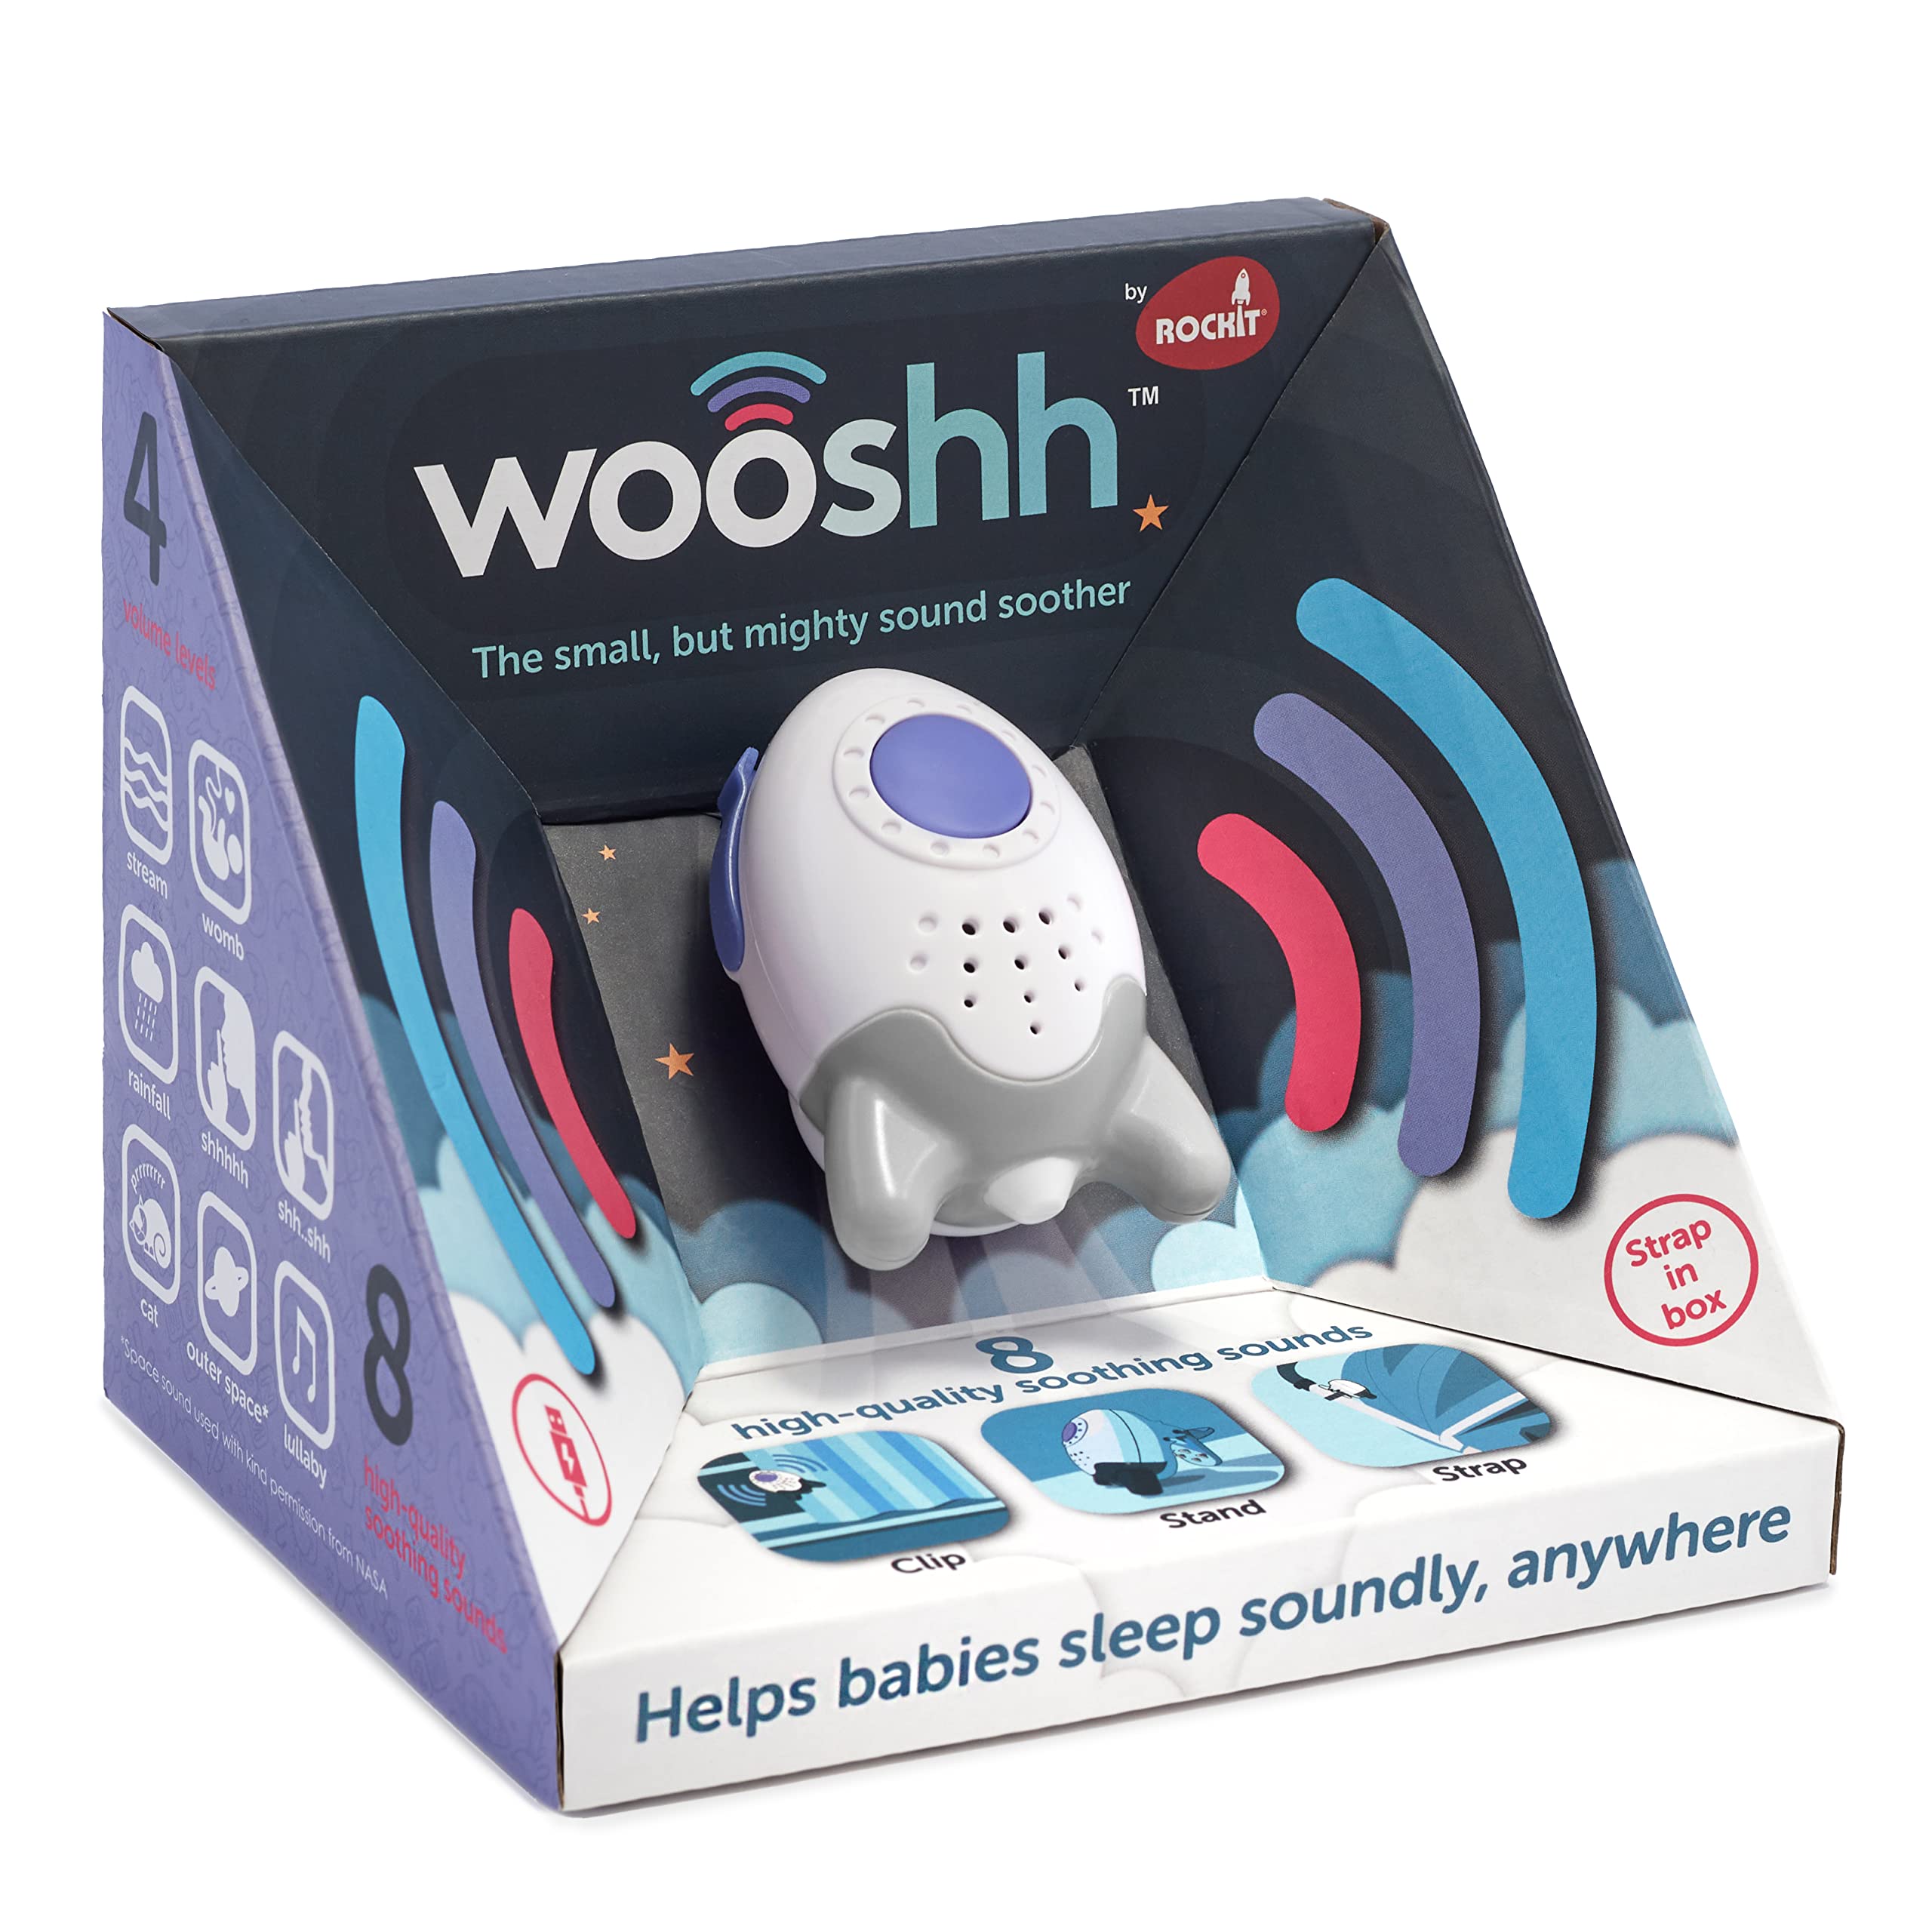 Wooshh by Rockit. Rechargeable, Portable Sound-Soother with 8 Calming Sounds and 4 Volume Levels. Stand, Clip or Strap it. You can take it with You Everywhere.